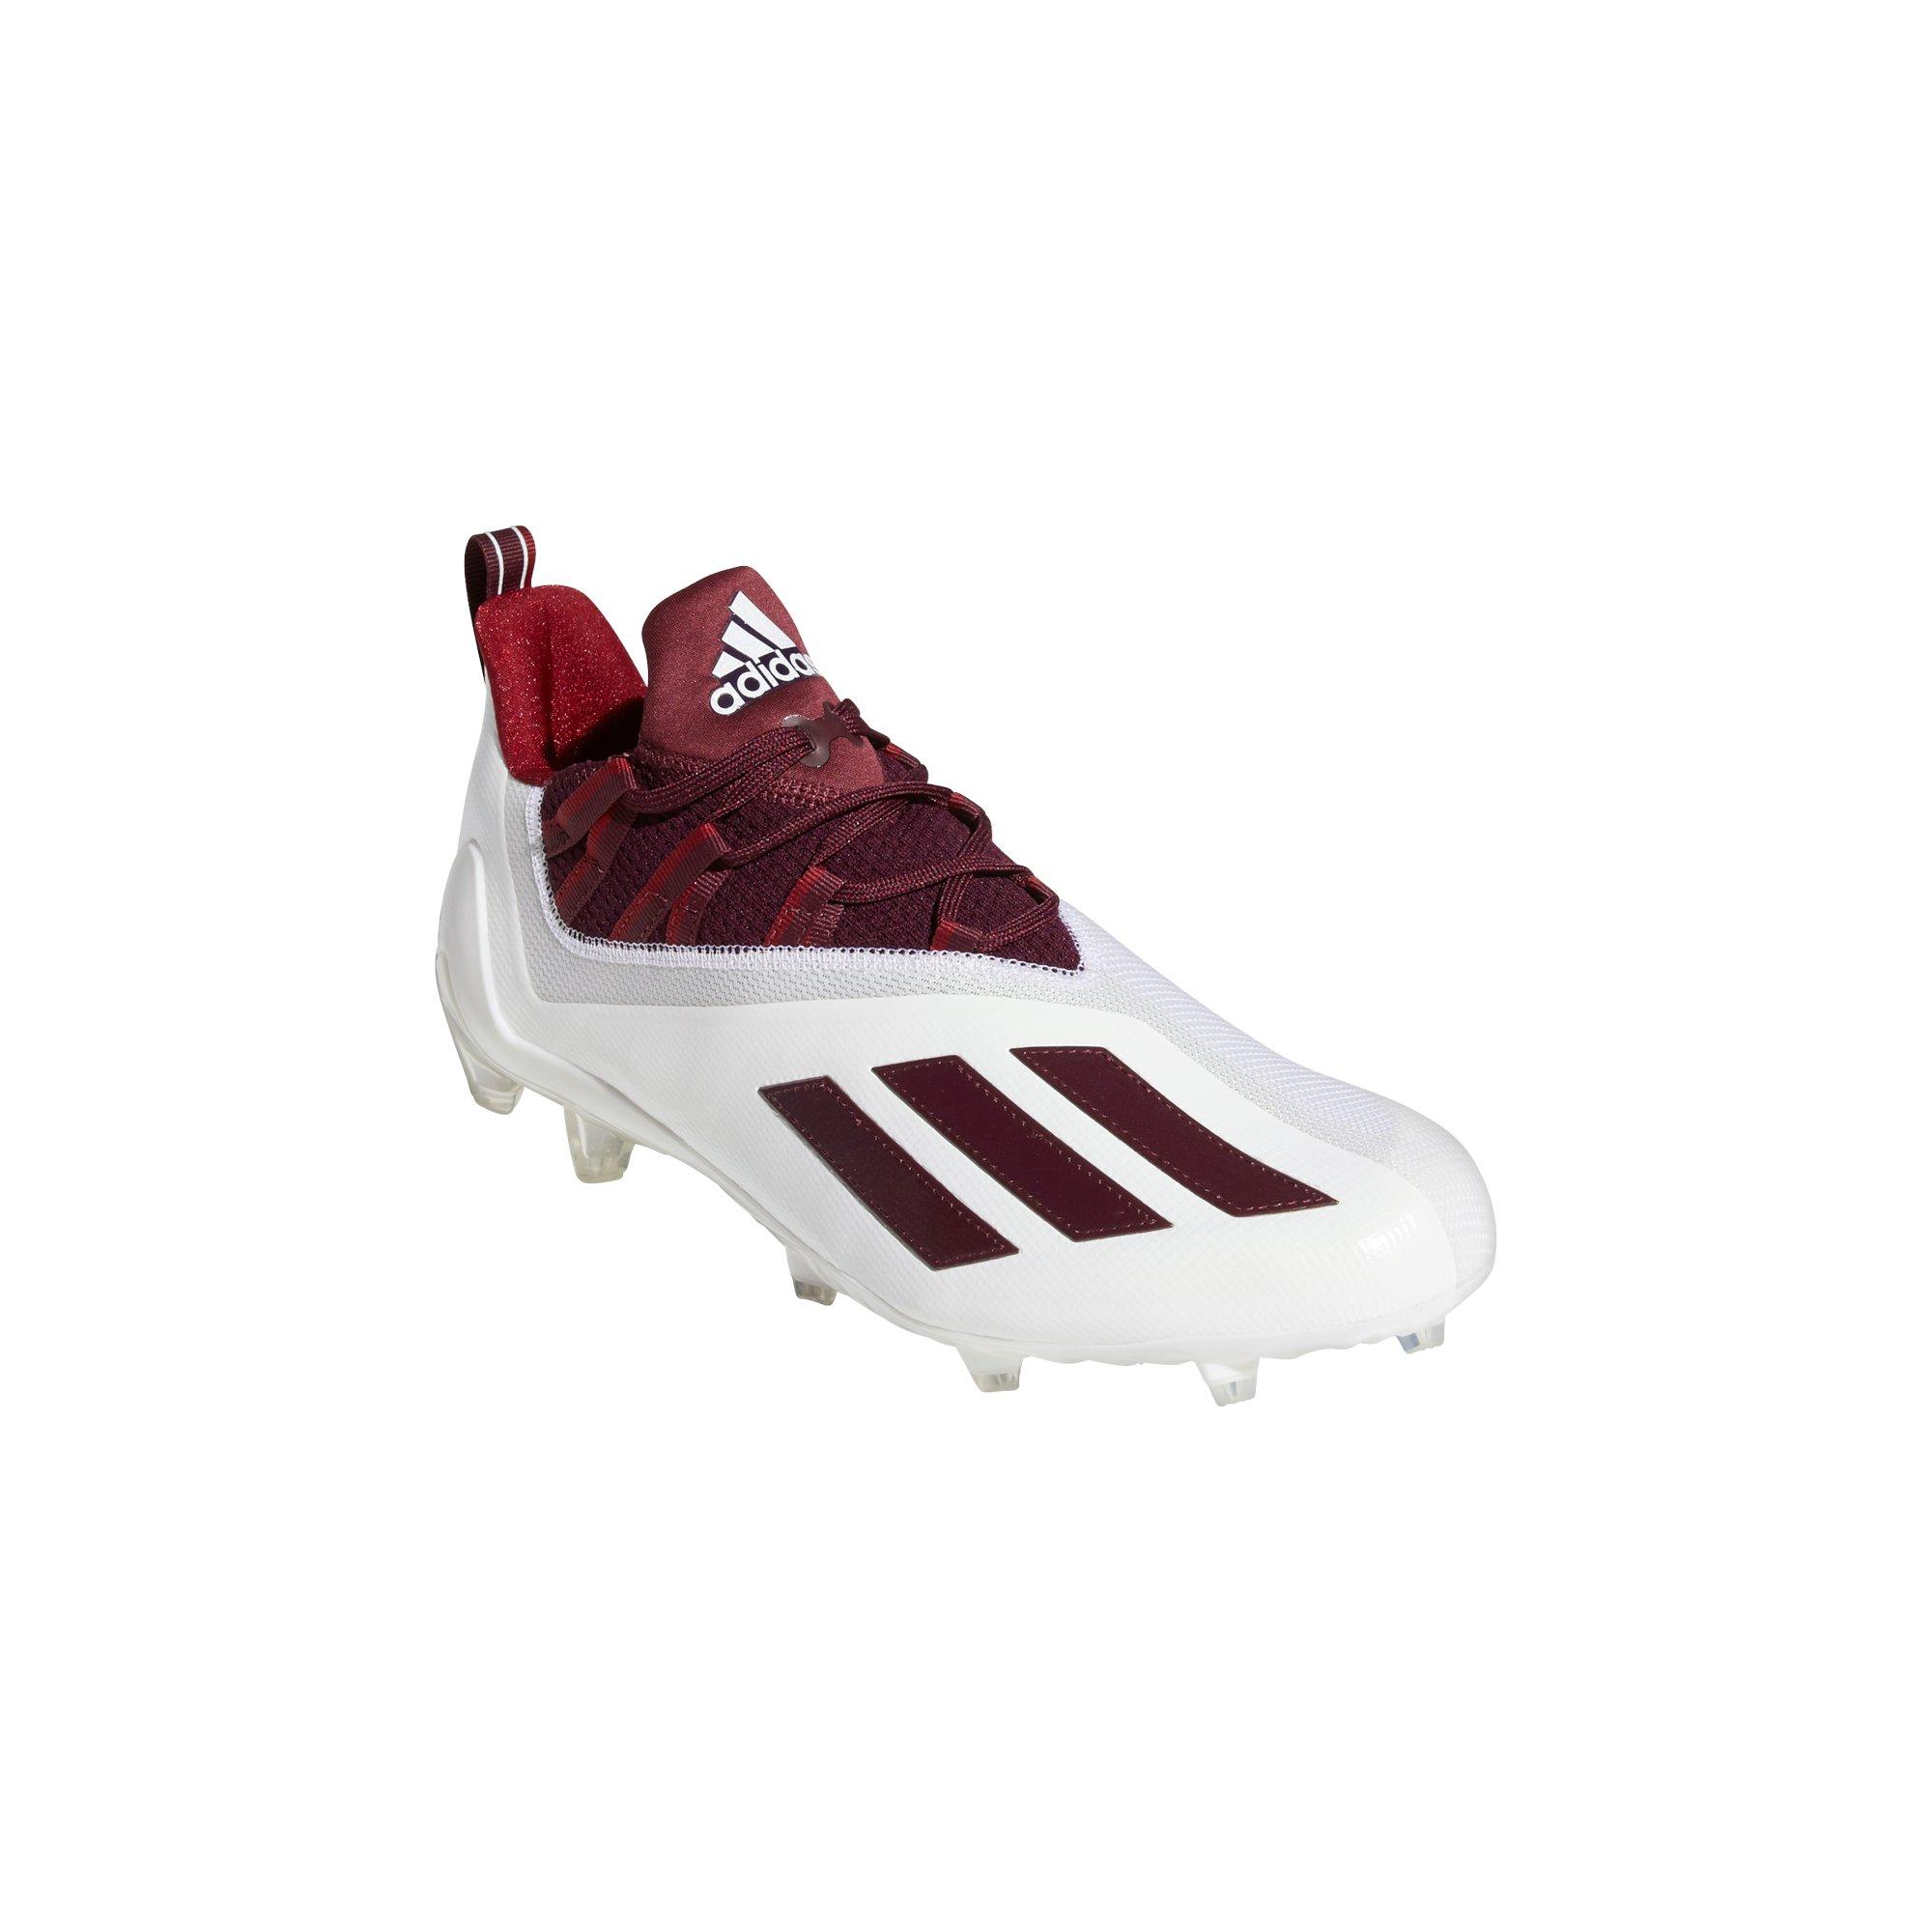 Details about   adizero Scorch White/Maroon Football Cleats 